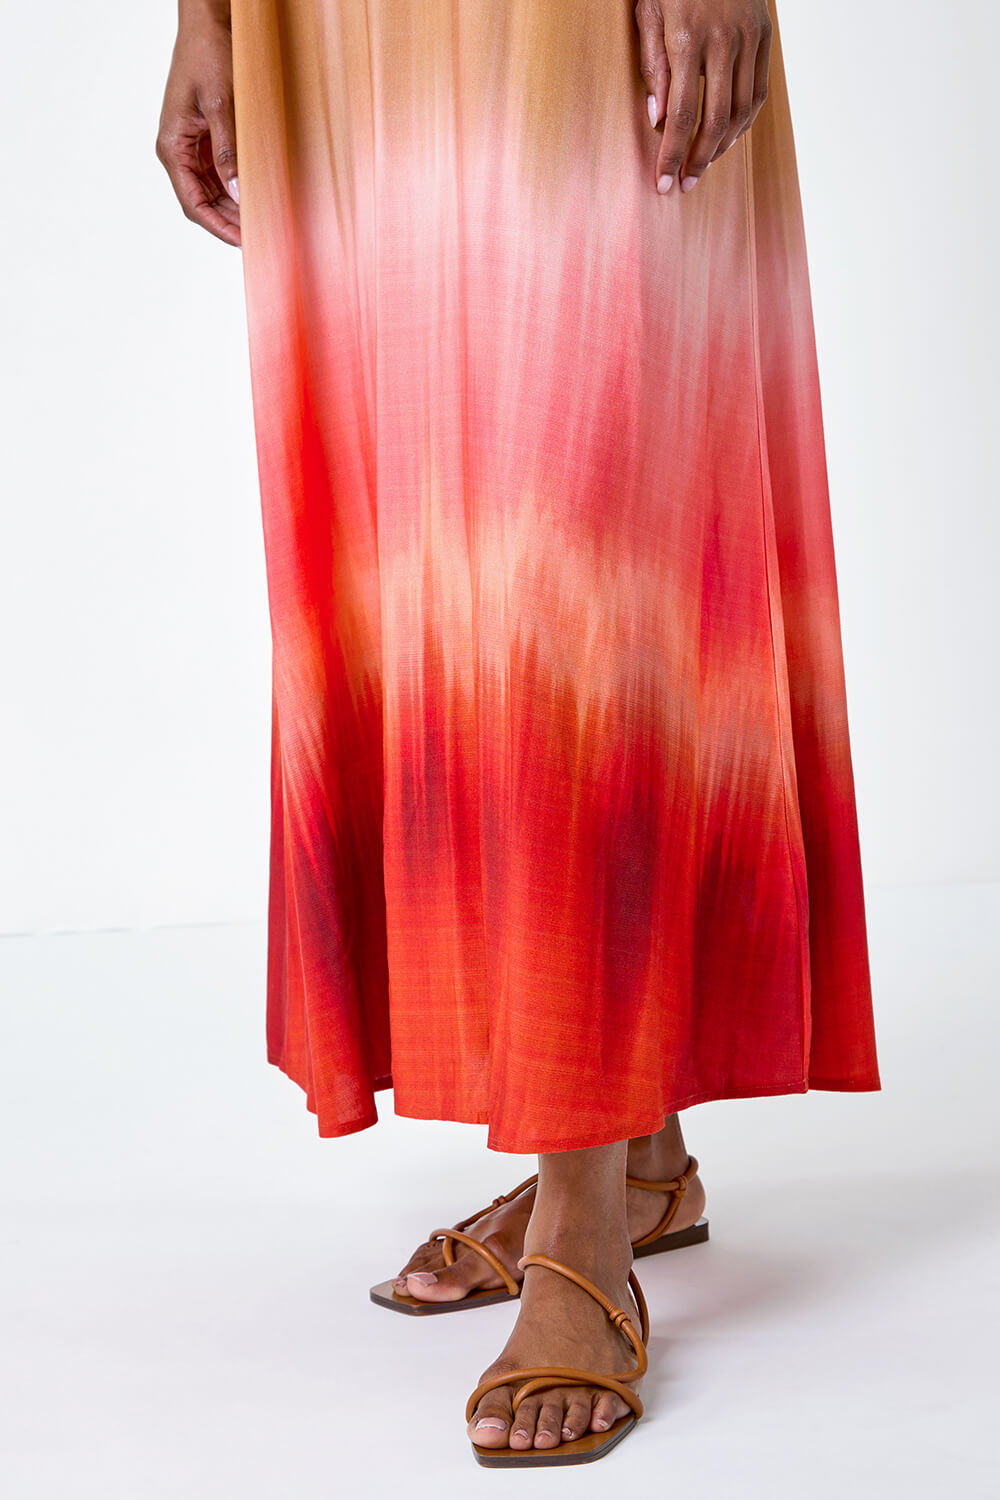 Red Sleeveless Ombre Midi Dress, Image 5 of 5